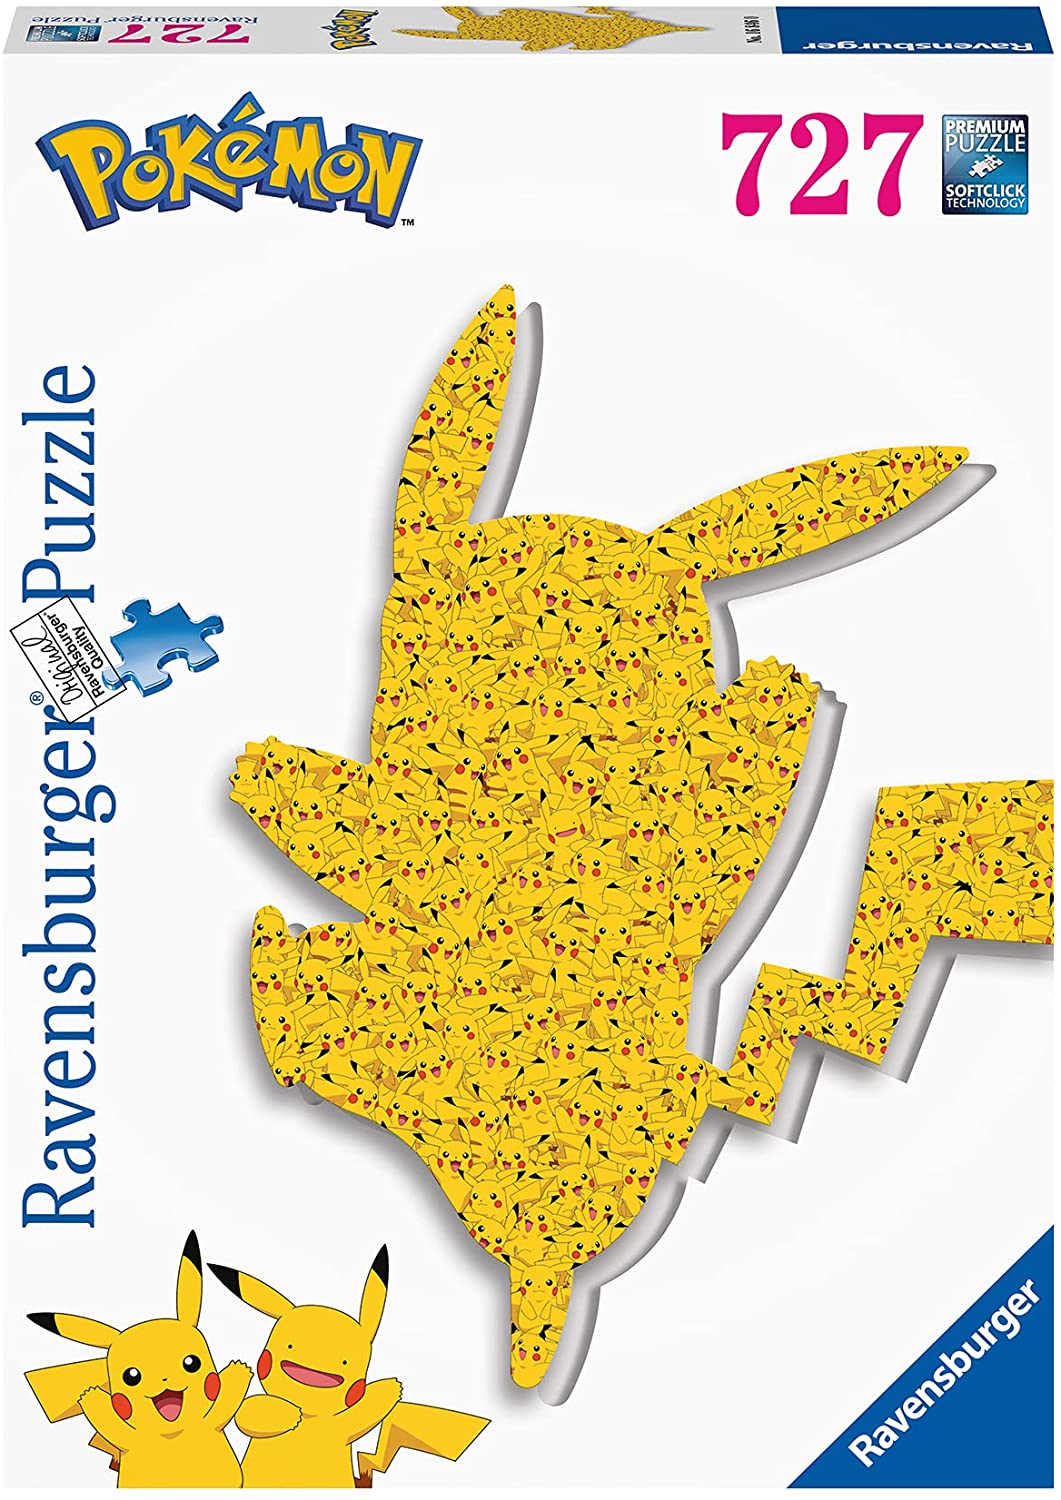 https://www.thepuzzlecollections.com/wp-content/uploads/2021/10/ravensburger-pikachu-shaped-puzzle.jpg